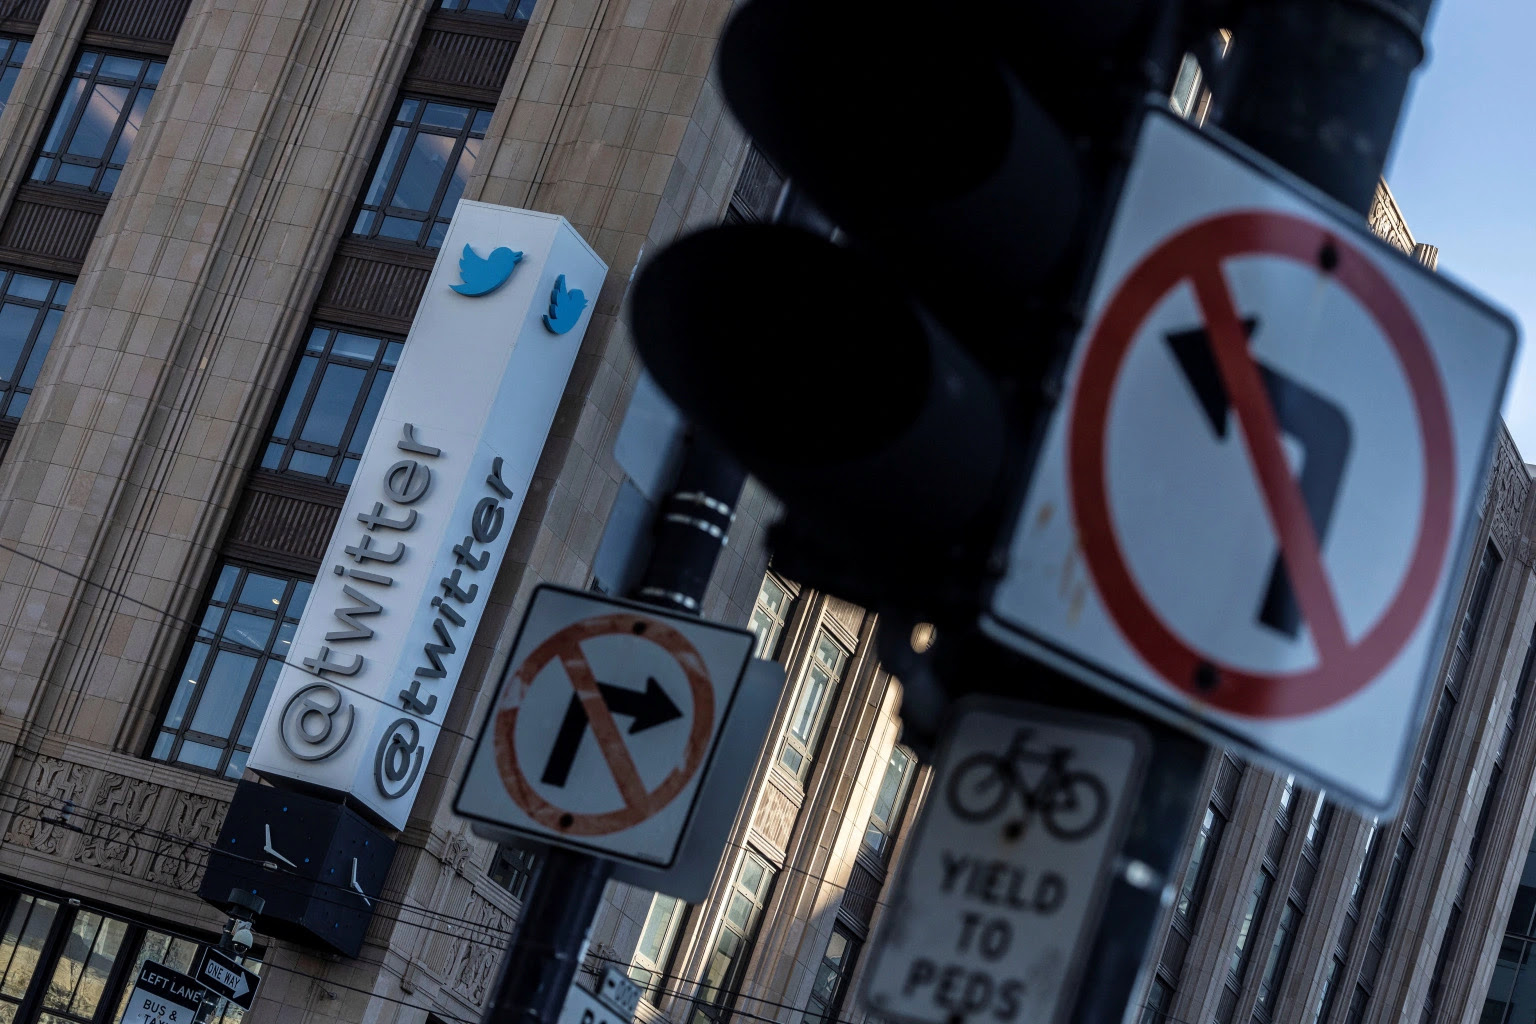 CPJ calls for Twitter to restore accounts of suspended journalists, commit to media freedom